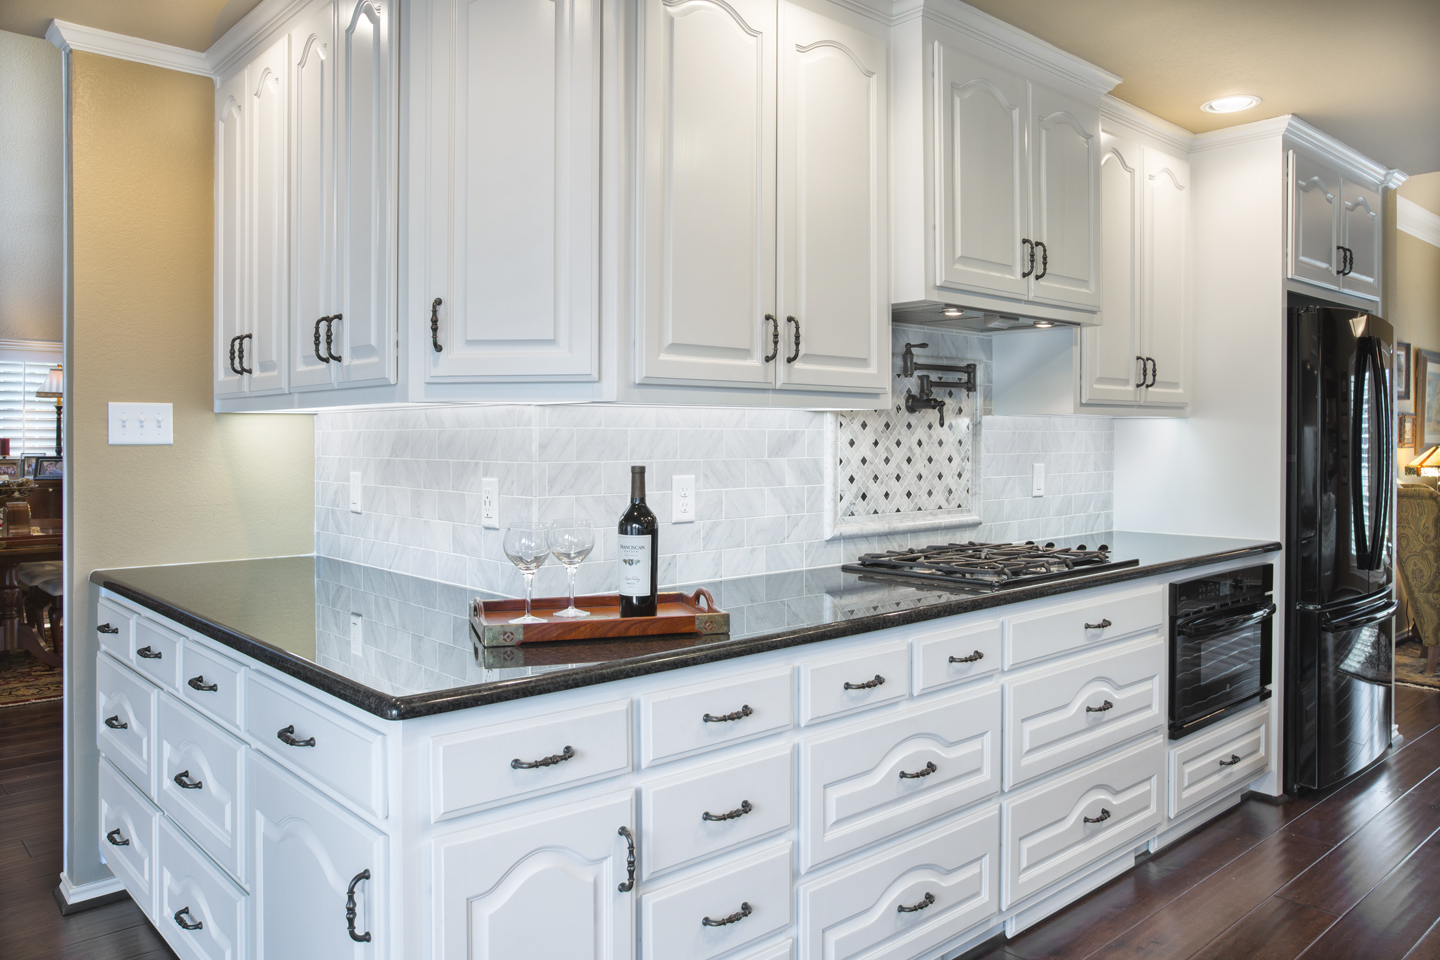 Complete Kitchen Cabinets